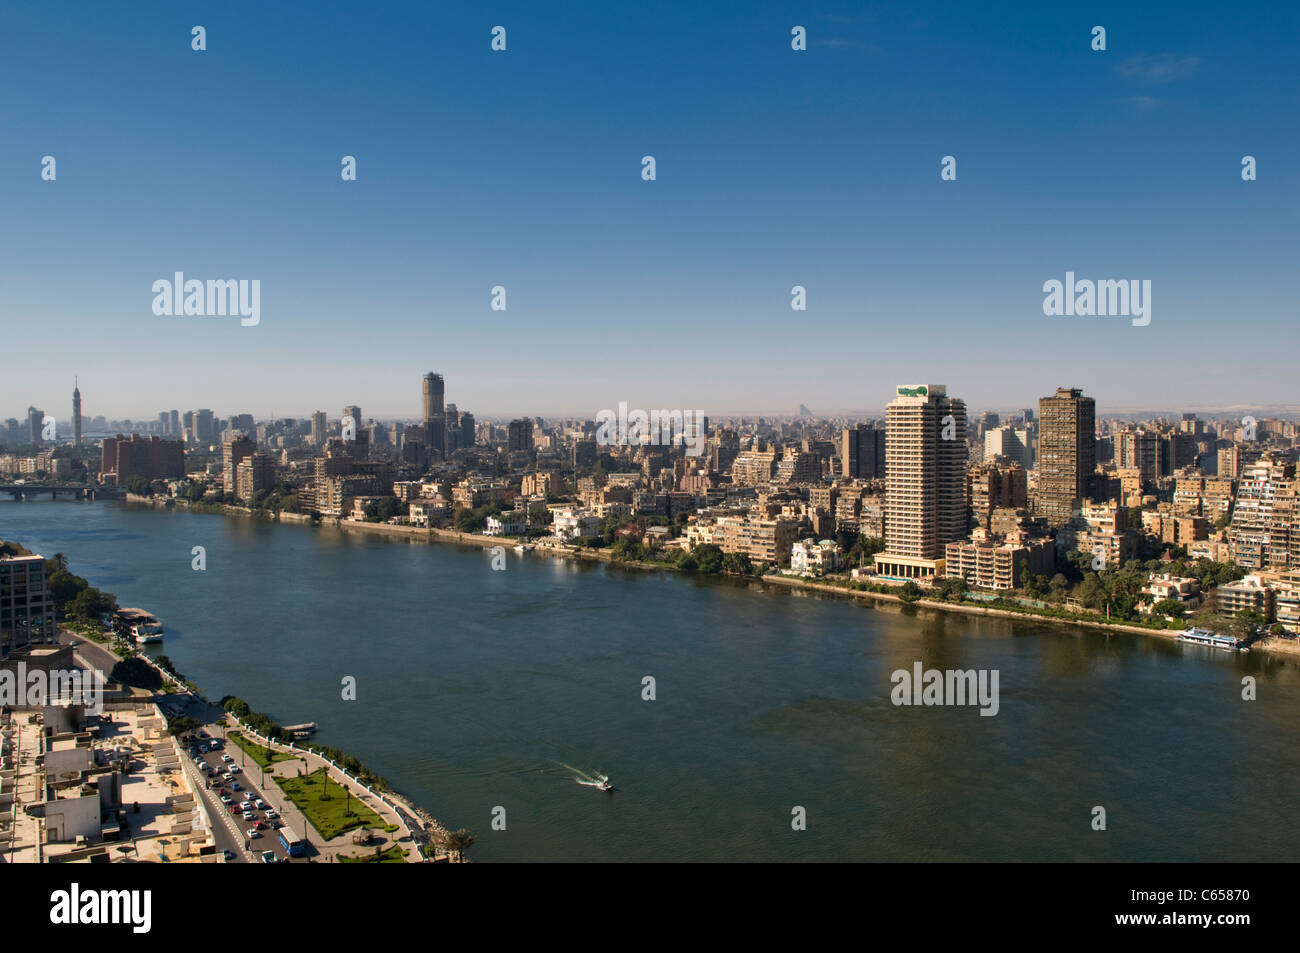 Nile River and cityscape of Cairo Egypt Stock Photo